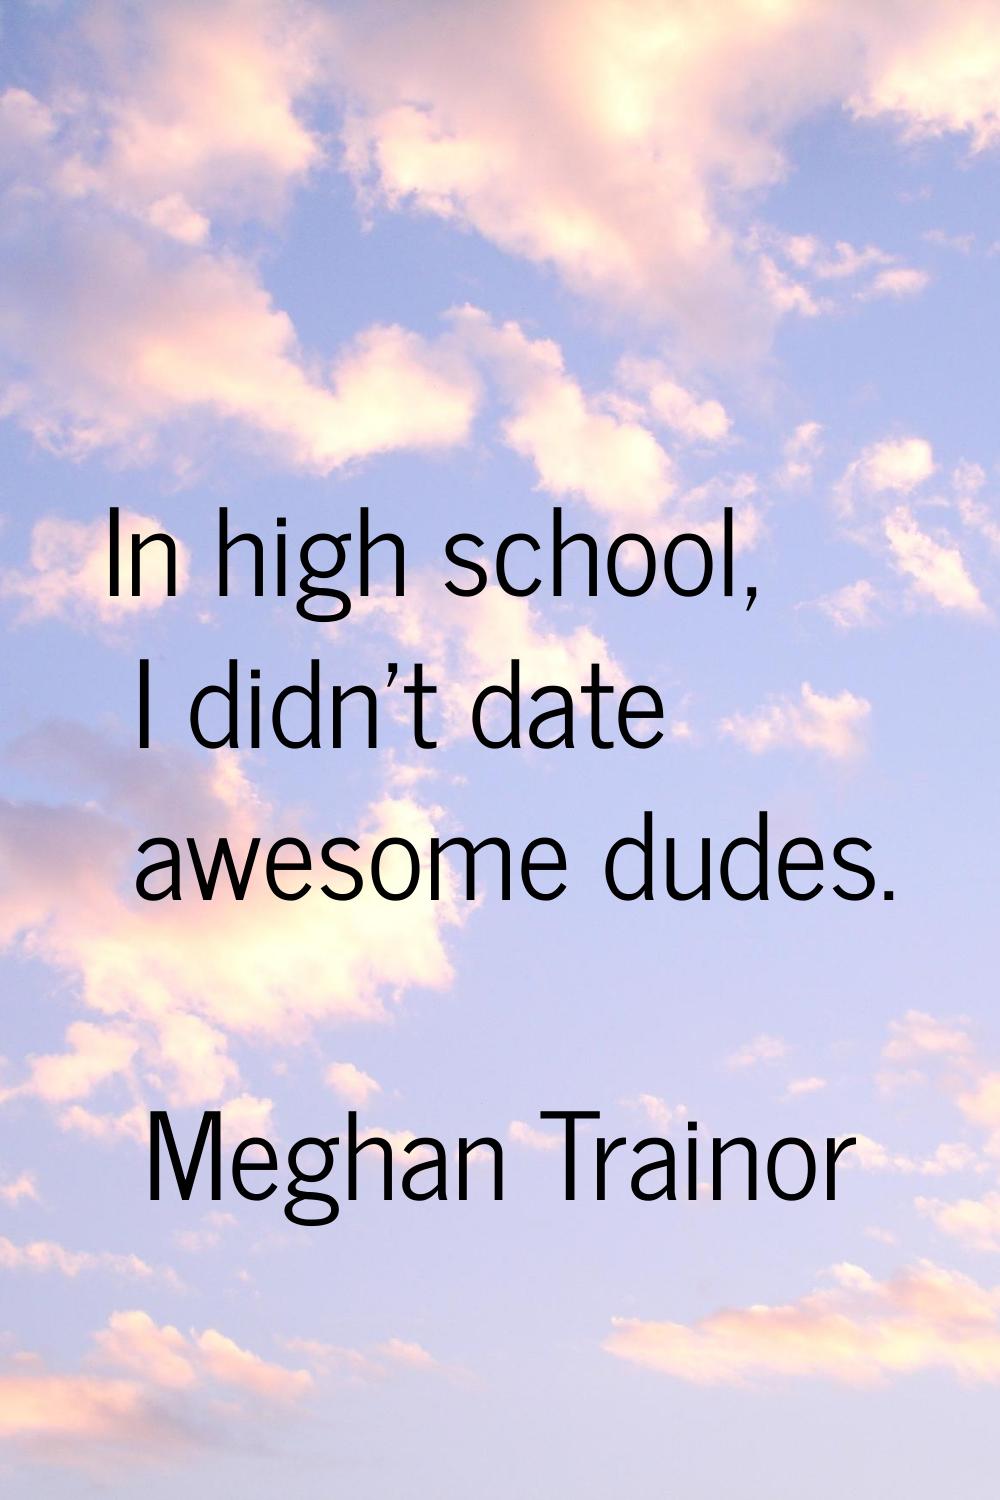 In high school, I didn't date awesome dudes.